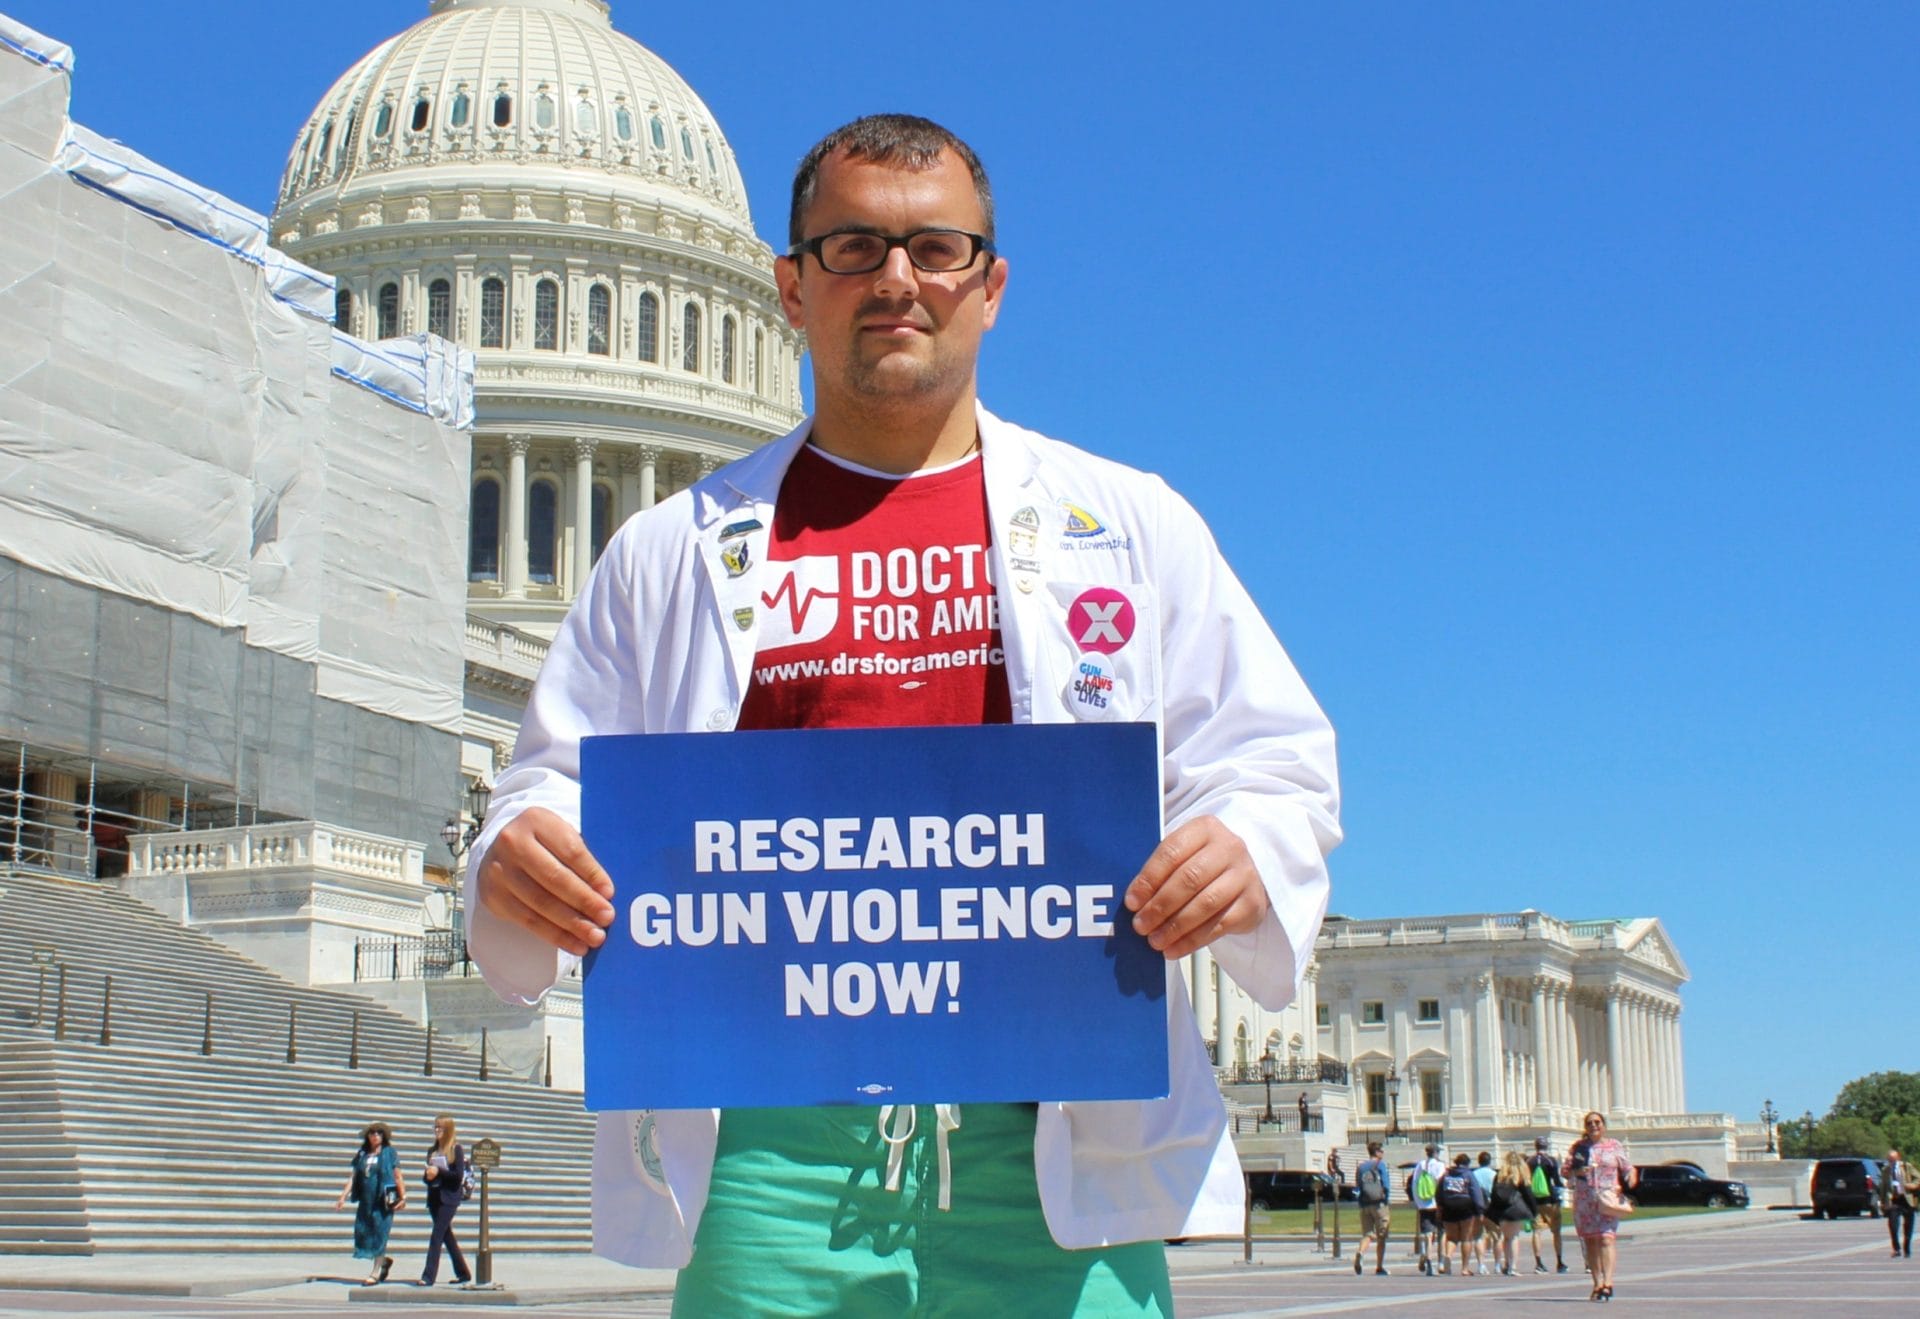 A member of the group Doctors for America stands in front of the U.S. Capitol before a gun violence research press conference. June 11, 2019'Research Gun Violence Now